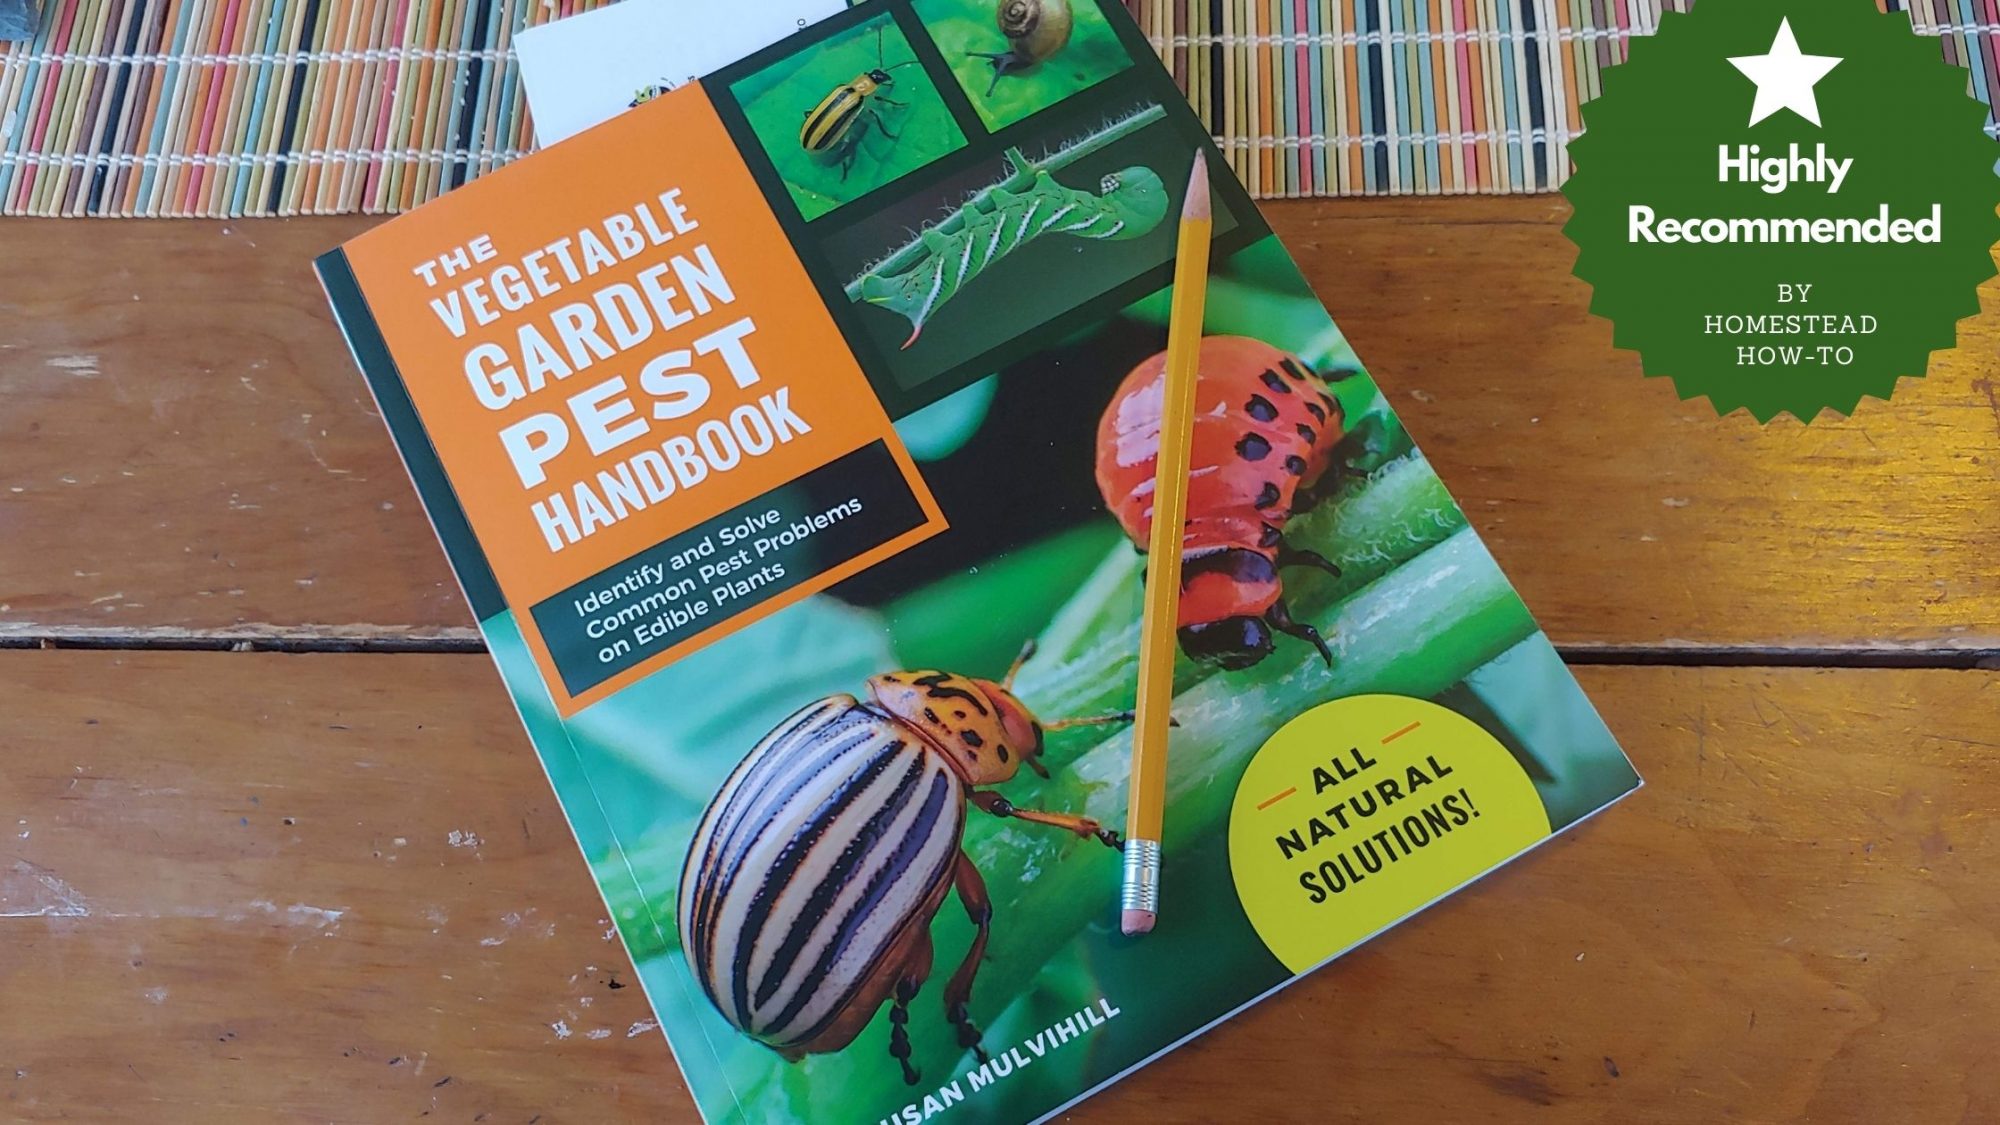 Garden Pest book on table with highly recommended seal of approval